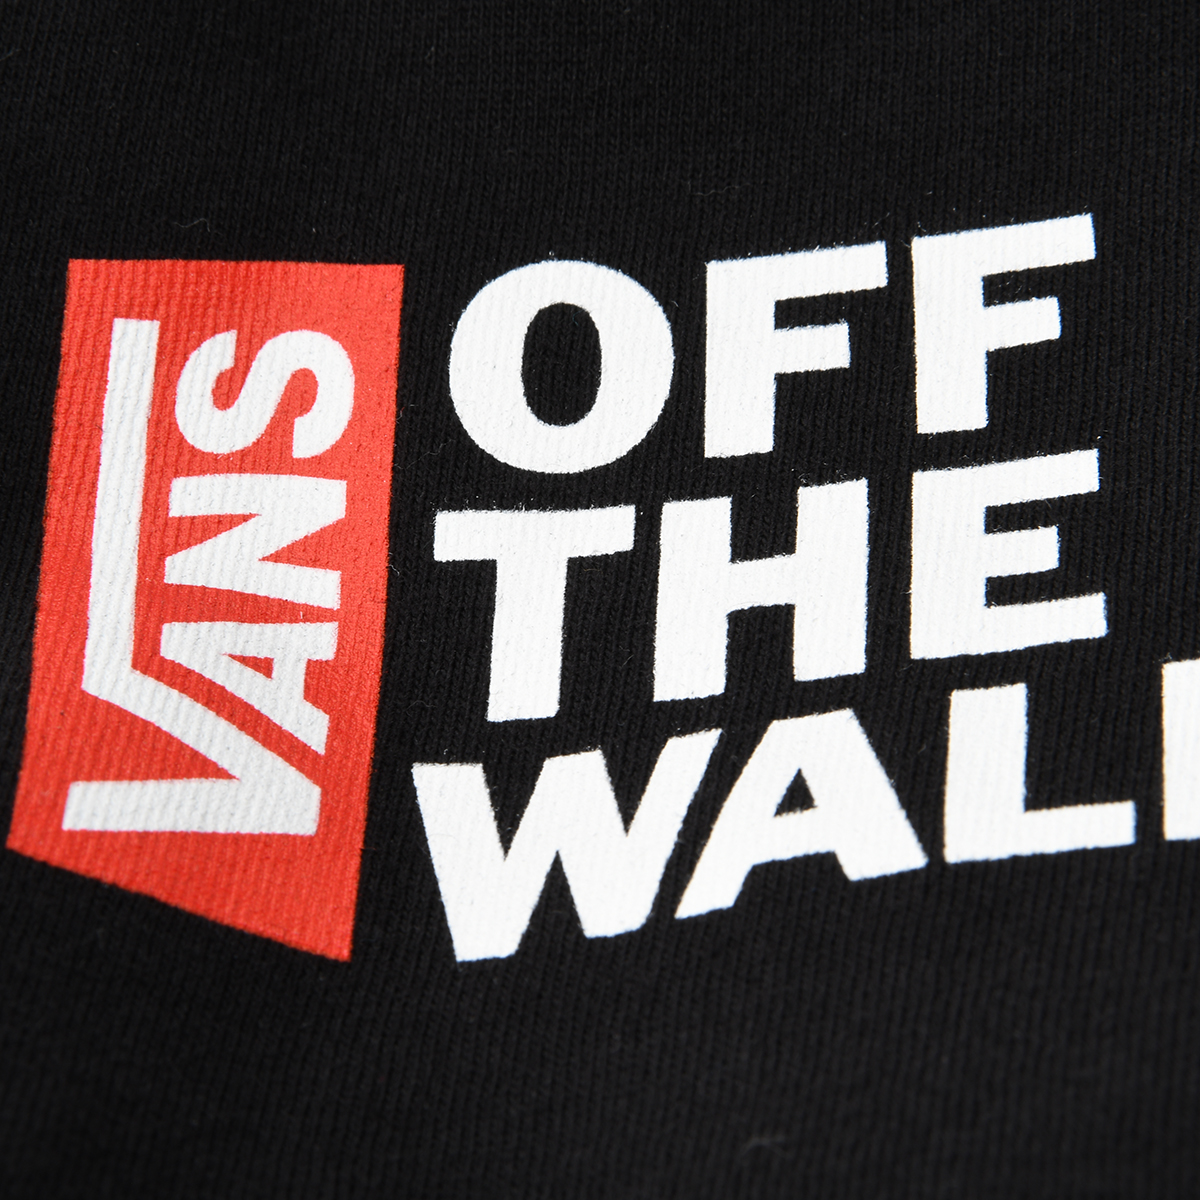 Musculosa Vans Off The Wall,  image number null